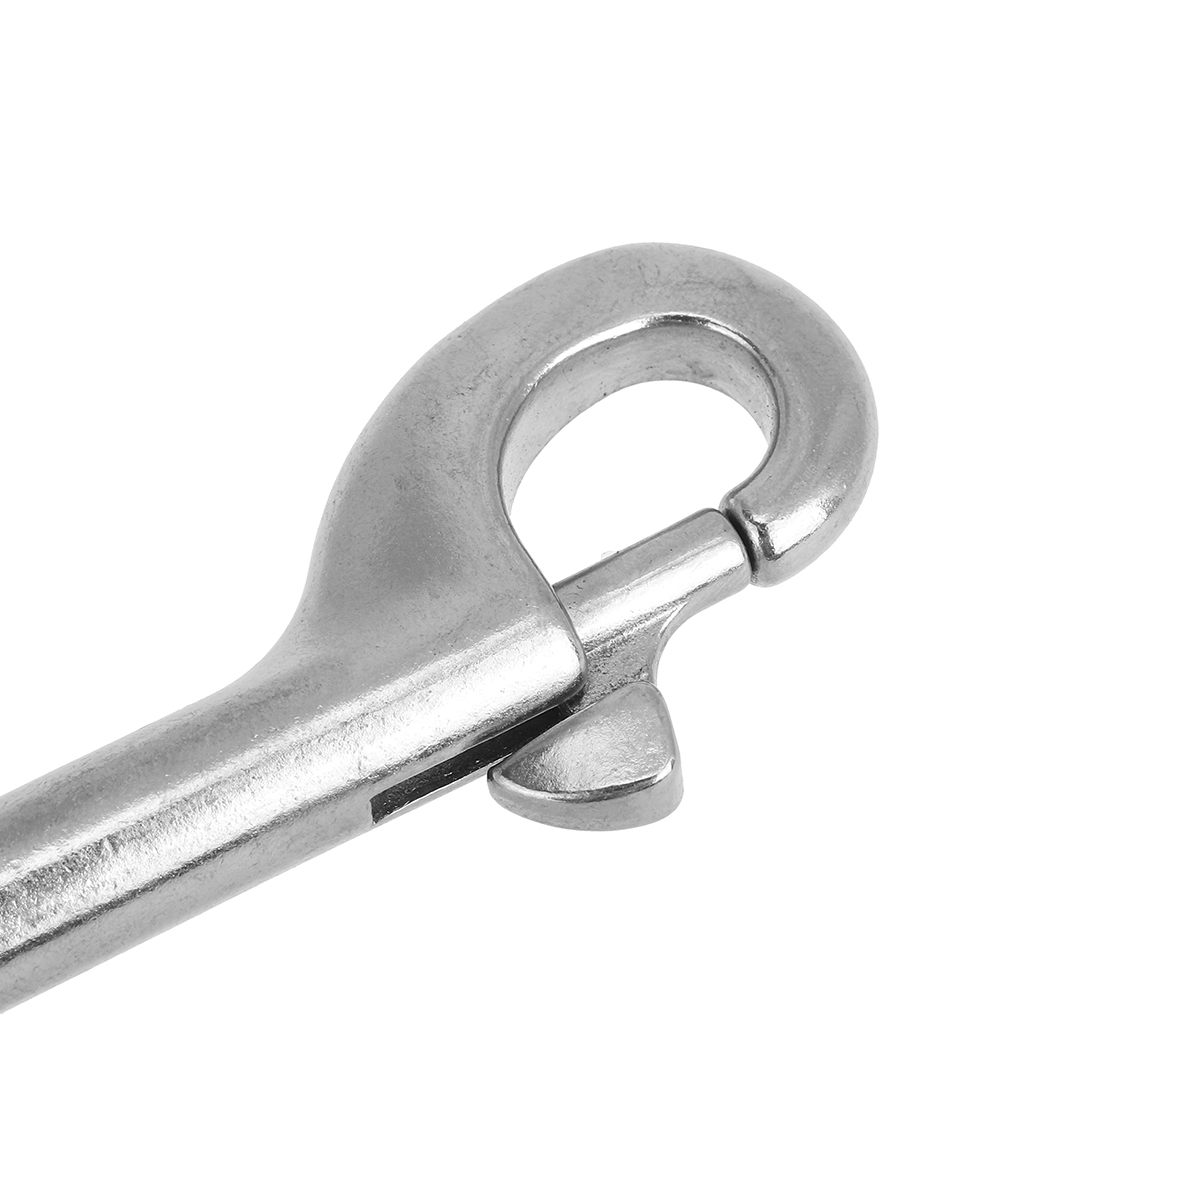 Double-End-Bolt-Snap-316-Stainless-Steel-Hook-Marine-Grade-Diving-Clips-Snap-Key-1724912-7